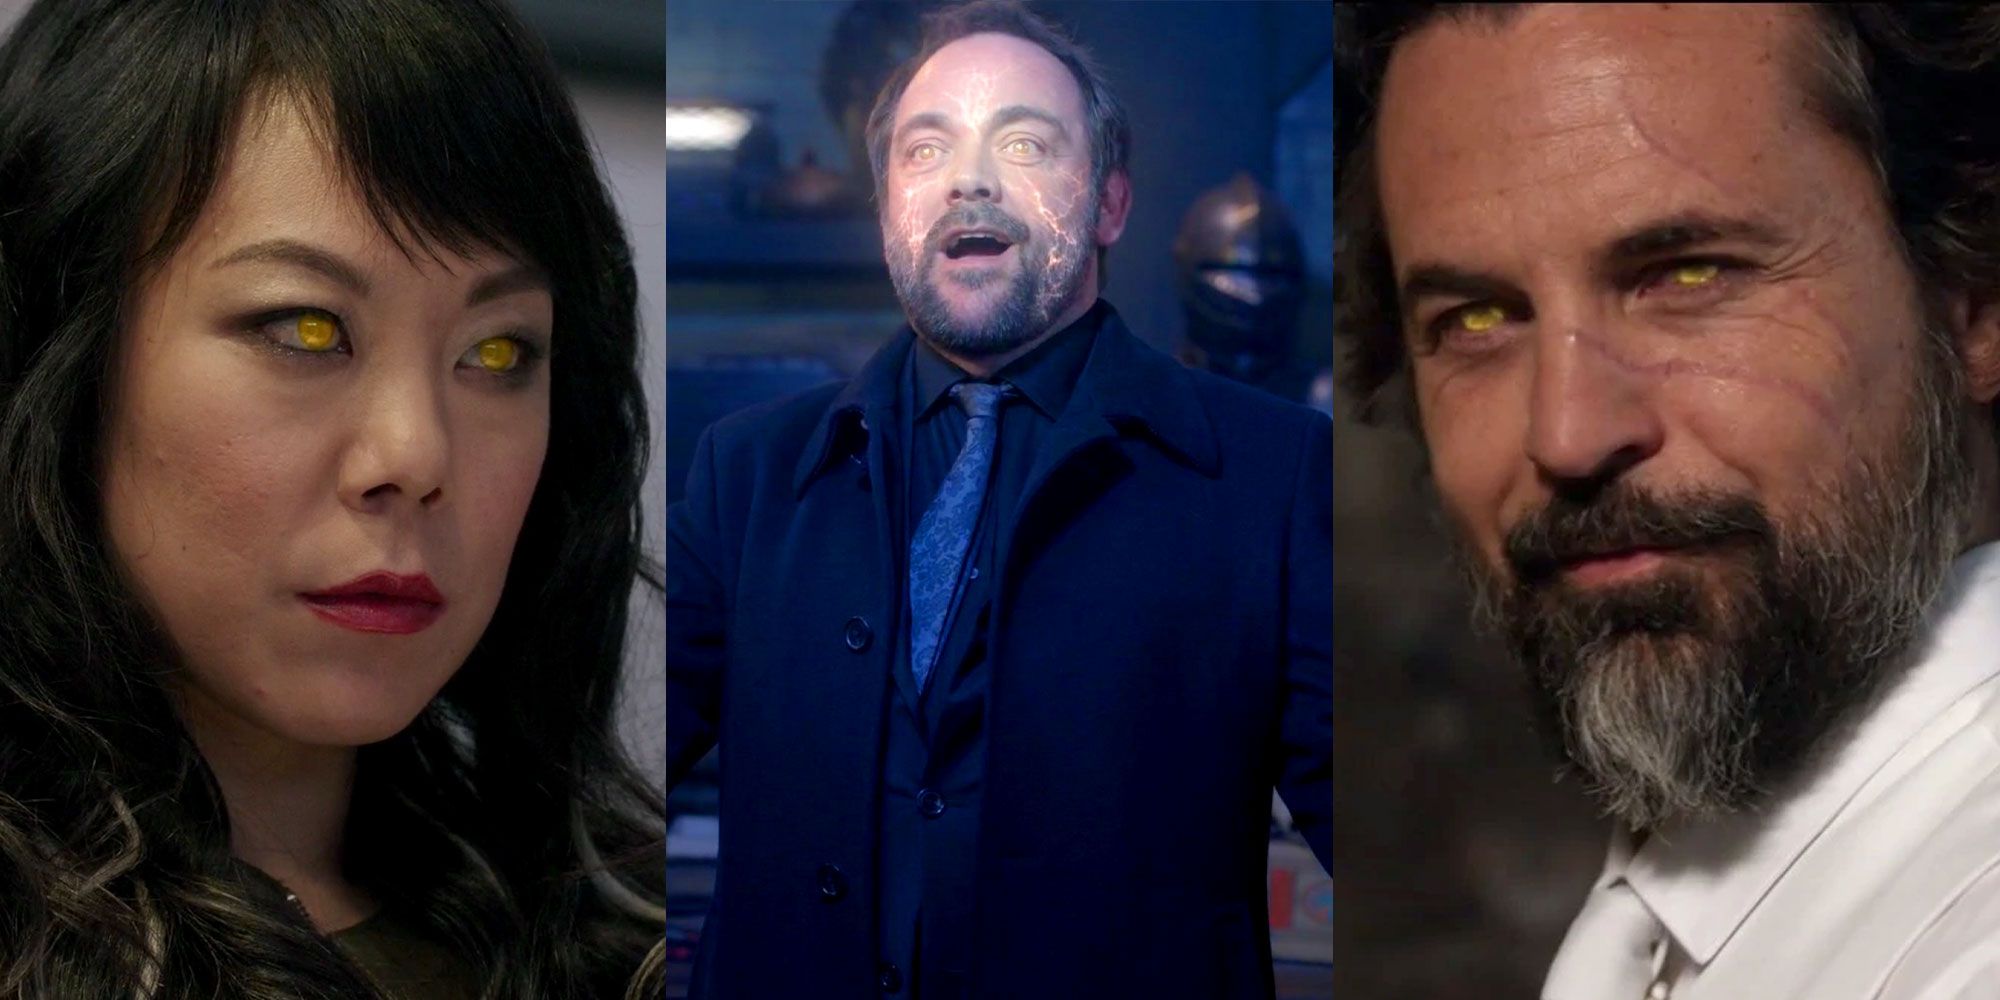 A split image features Dagon, Crowley, and Asmodeus in Supernatural